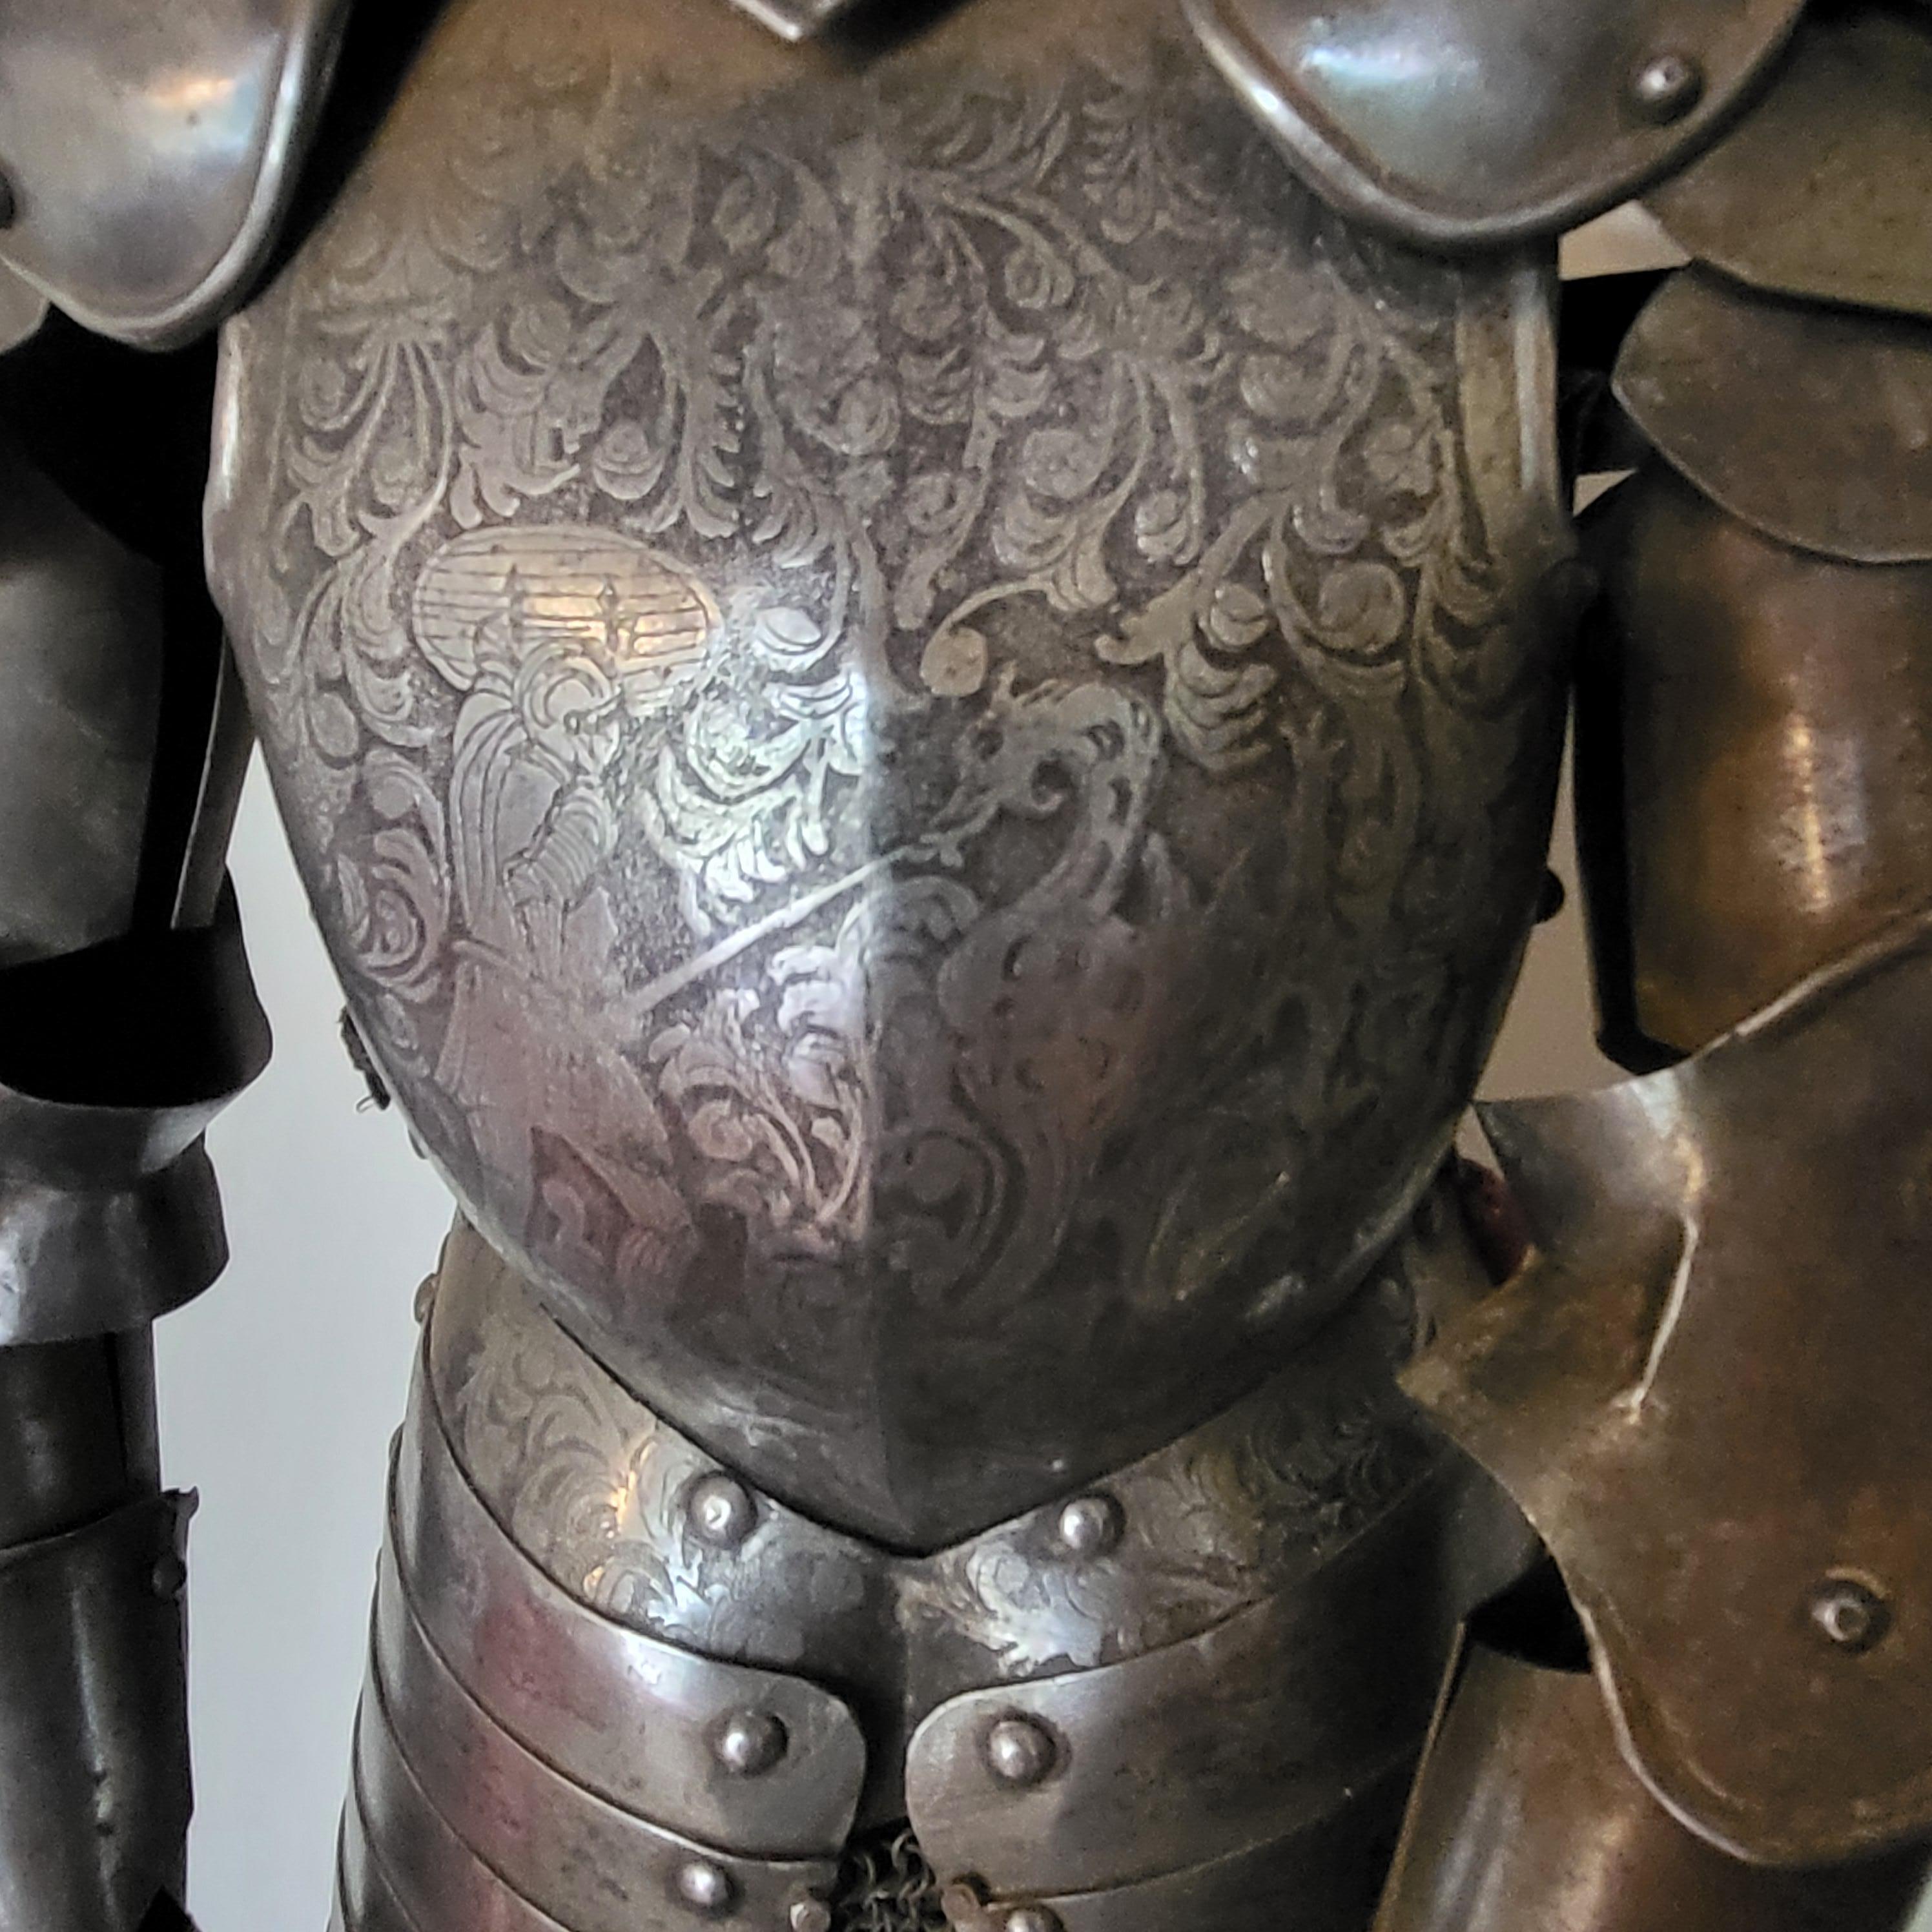 Hutton-Clarke Antiques proudly presents a rare and unique miniature suit of medieval armour, likely originating from Italy or Spain and dating back to the mid to late 19th century. Standing at 74 centimetres, this exquisite piece captures the